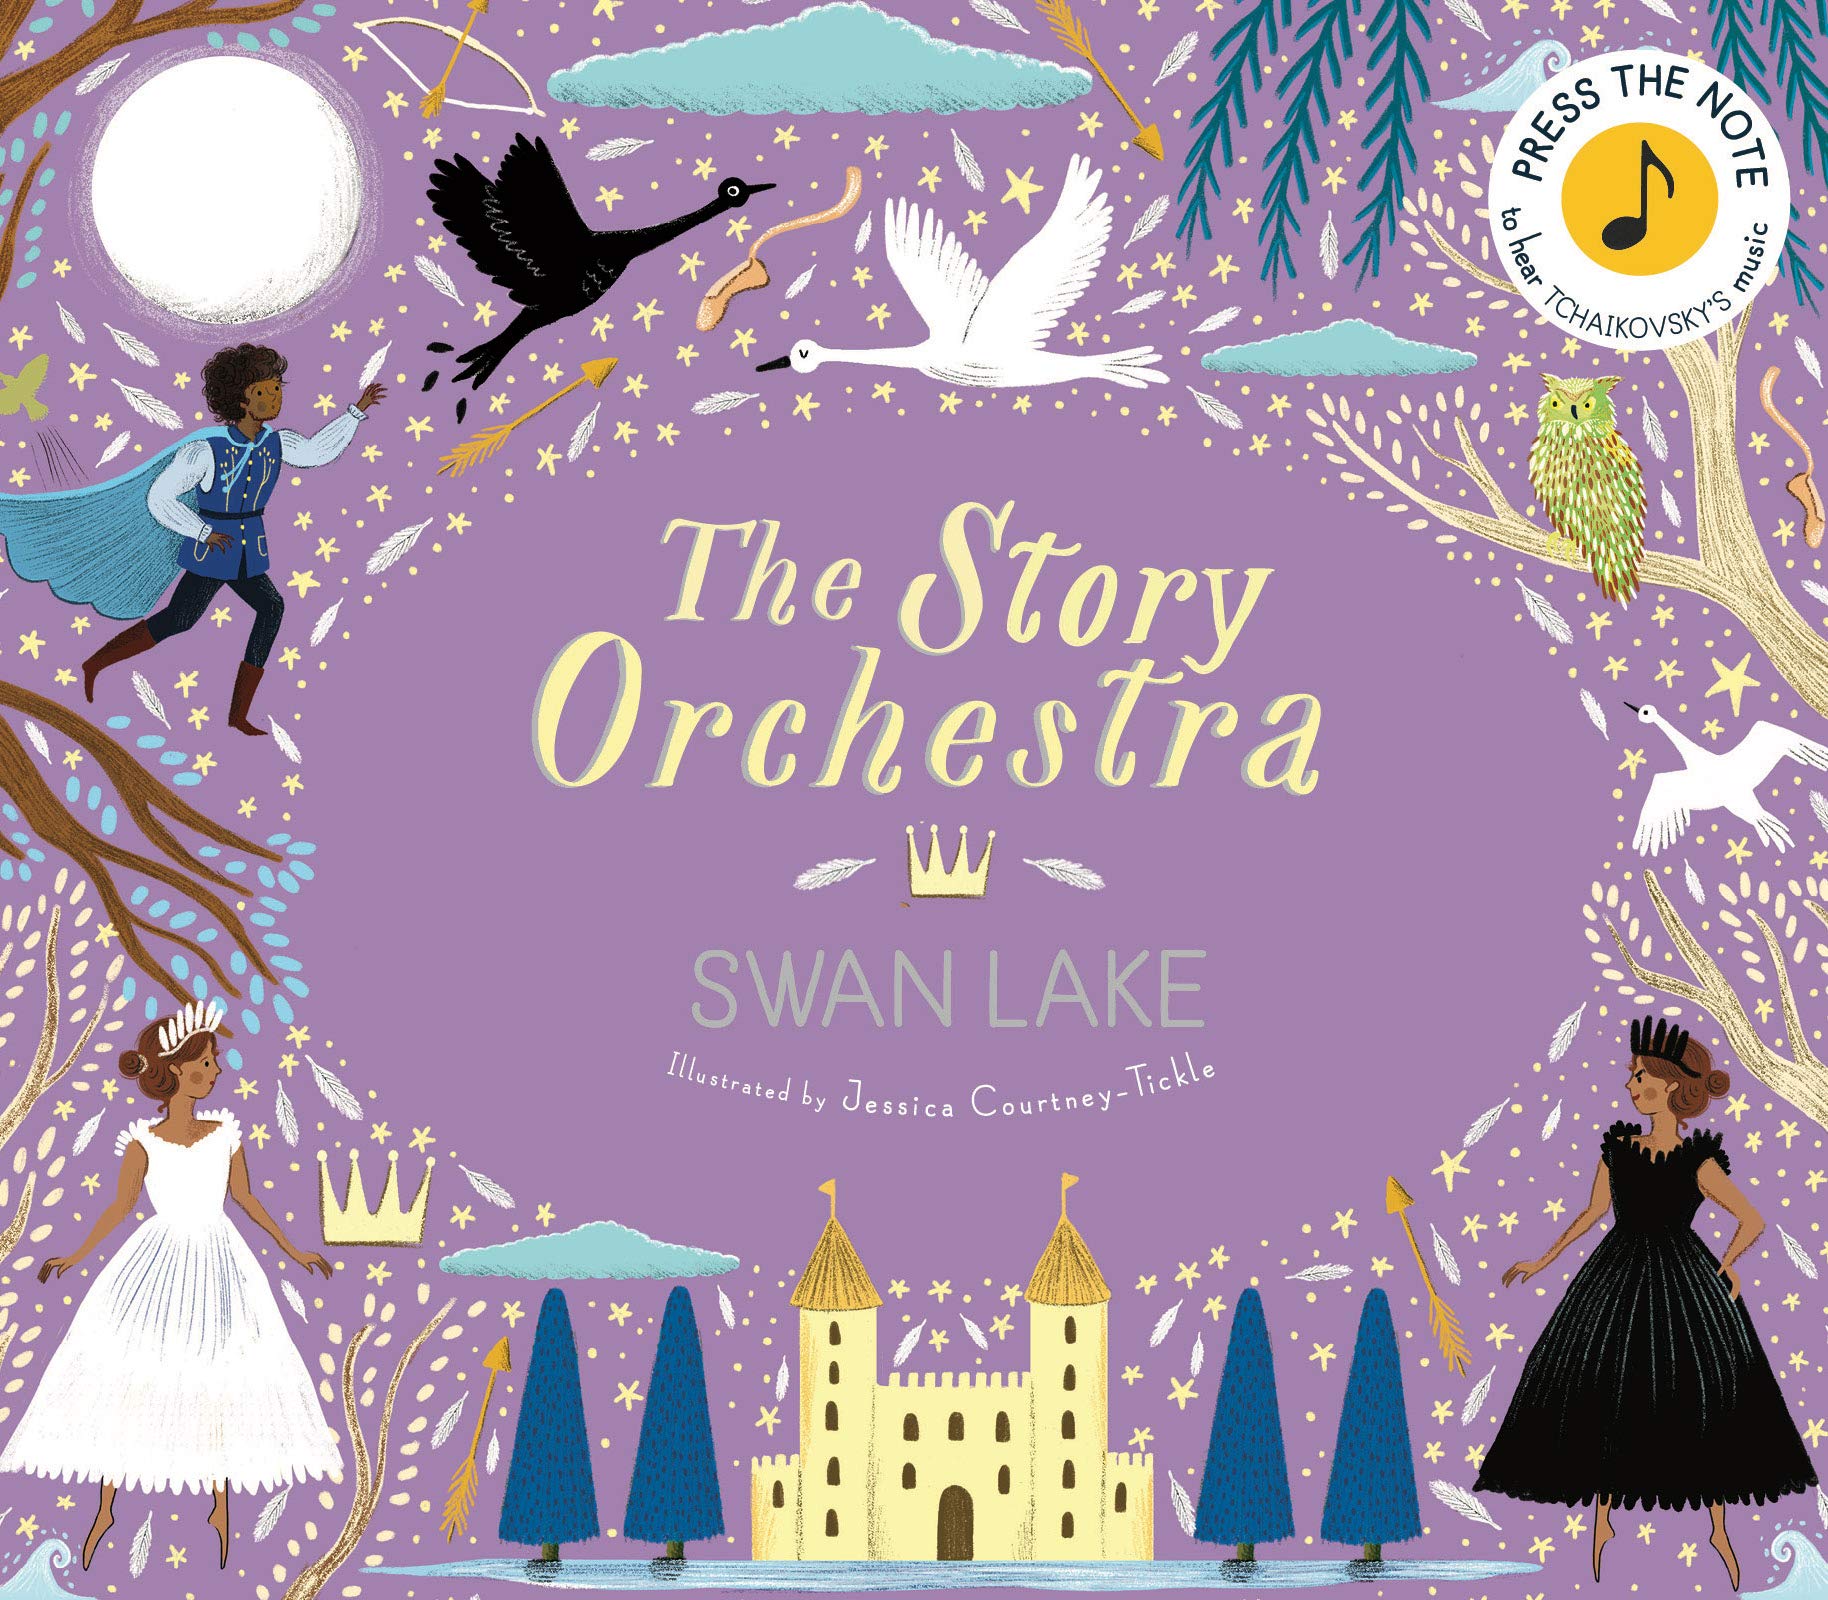 The Story Orchestra: Swan Lake: Press the note to hear Tchaikovsky's music